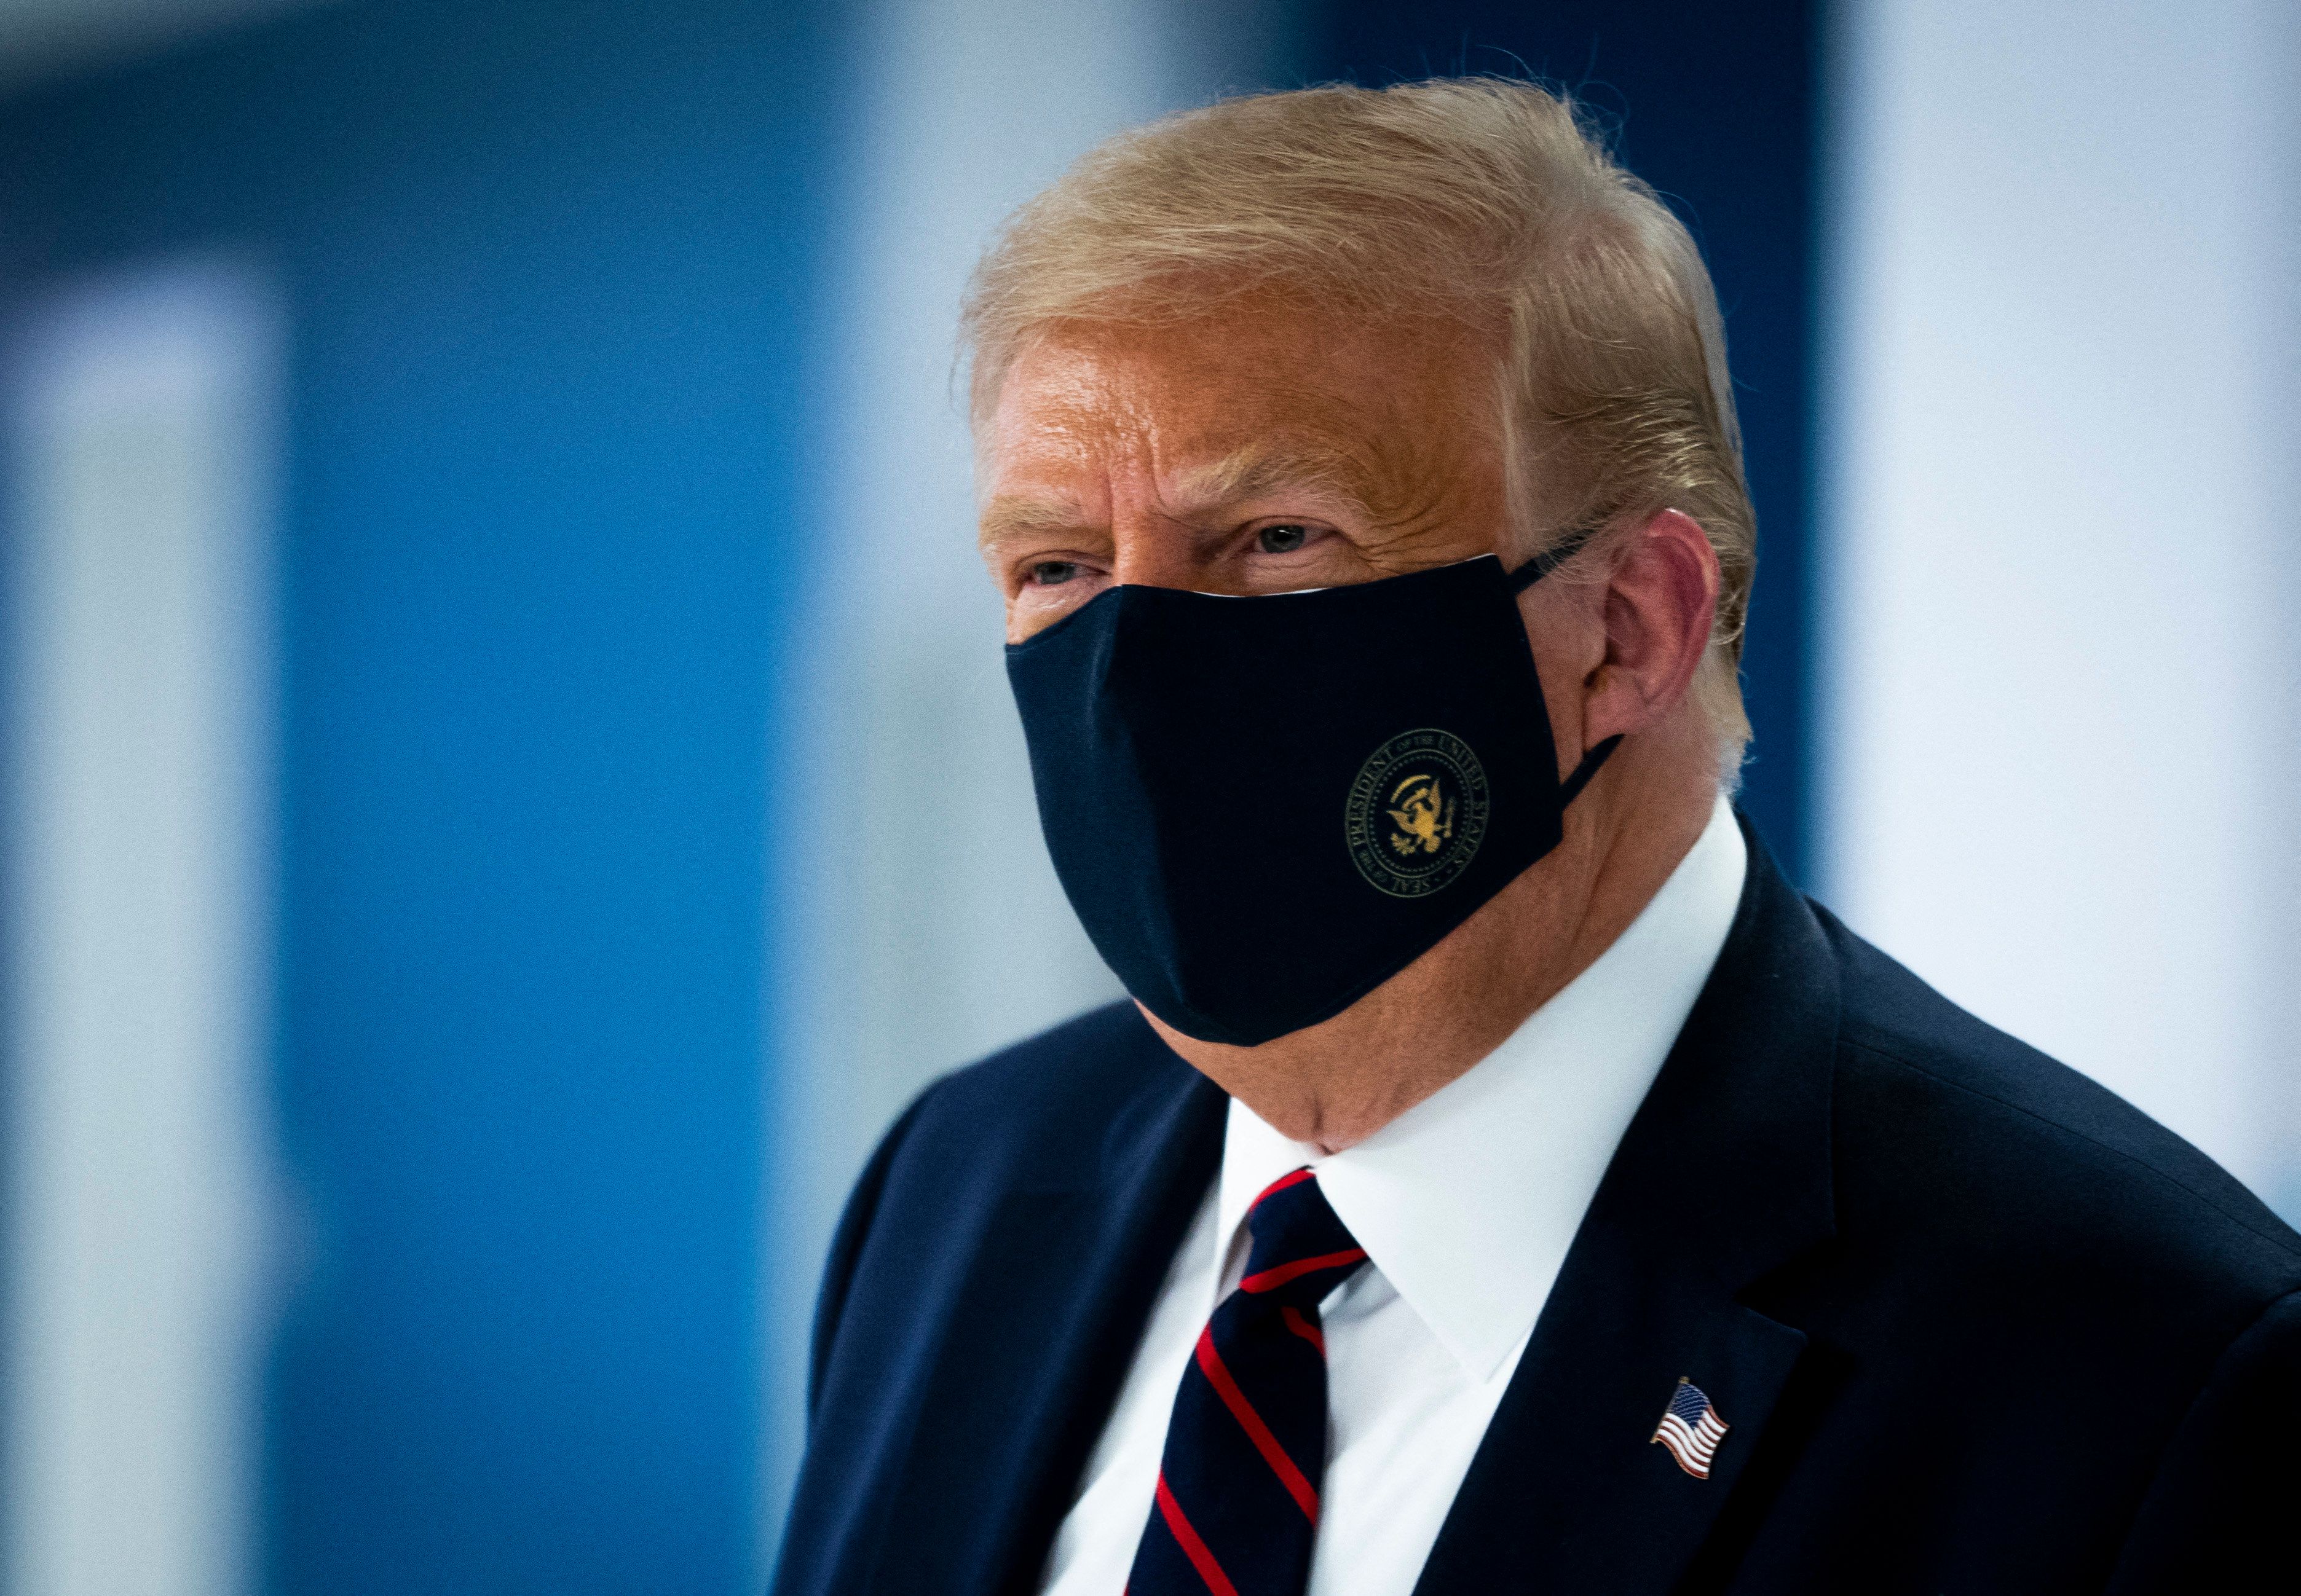 US President Donald Trump wearing a face mask against COVID-19. Reuters